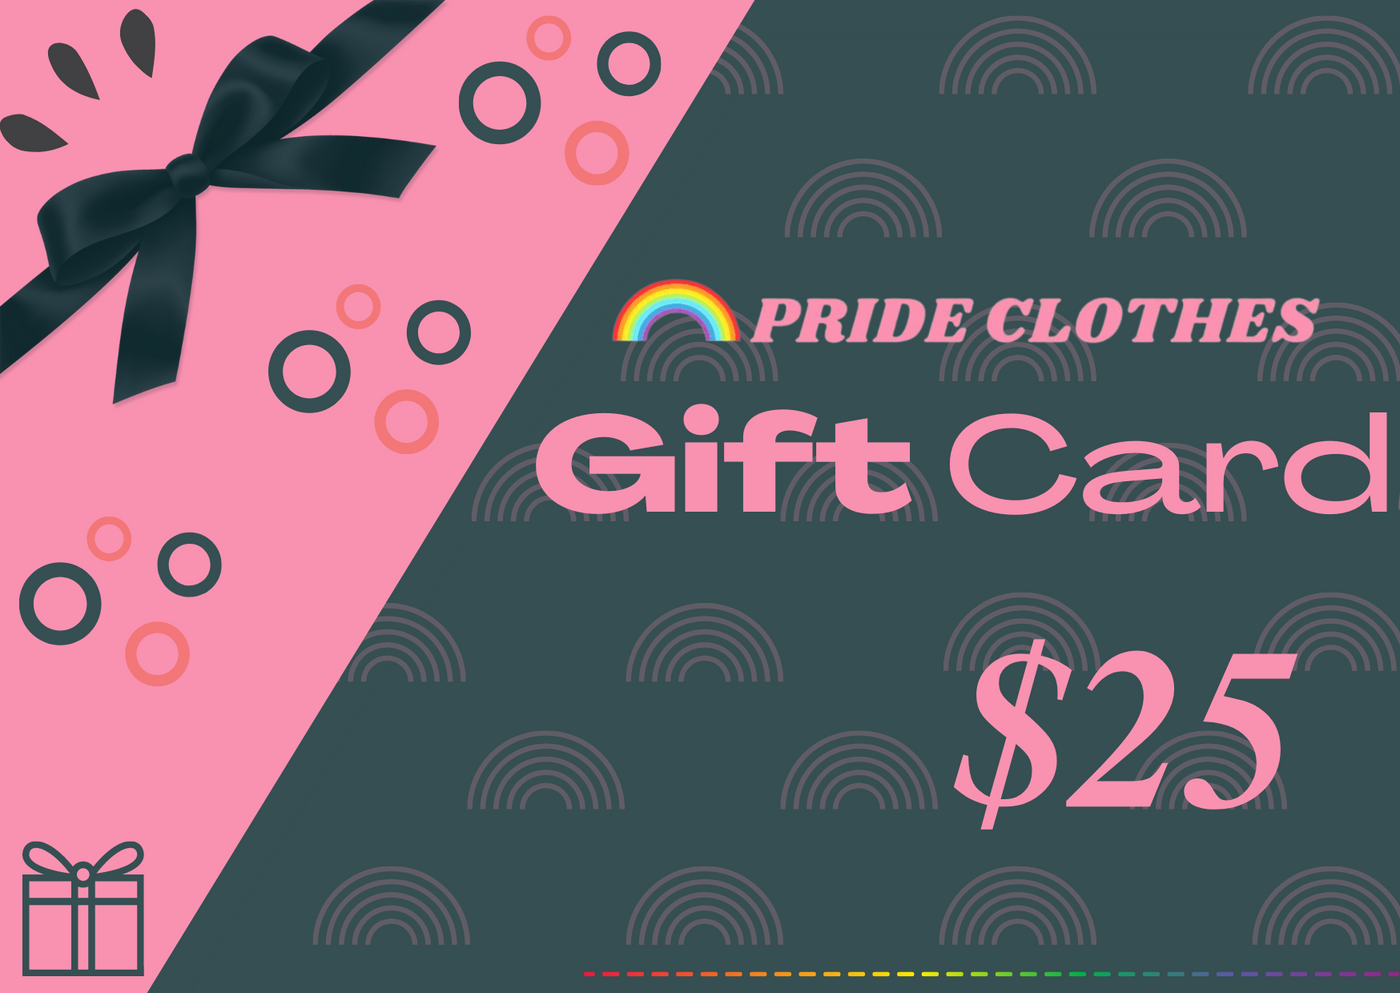 Pride_Clothes_Gift_Card_25_Dollars